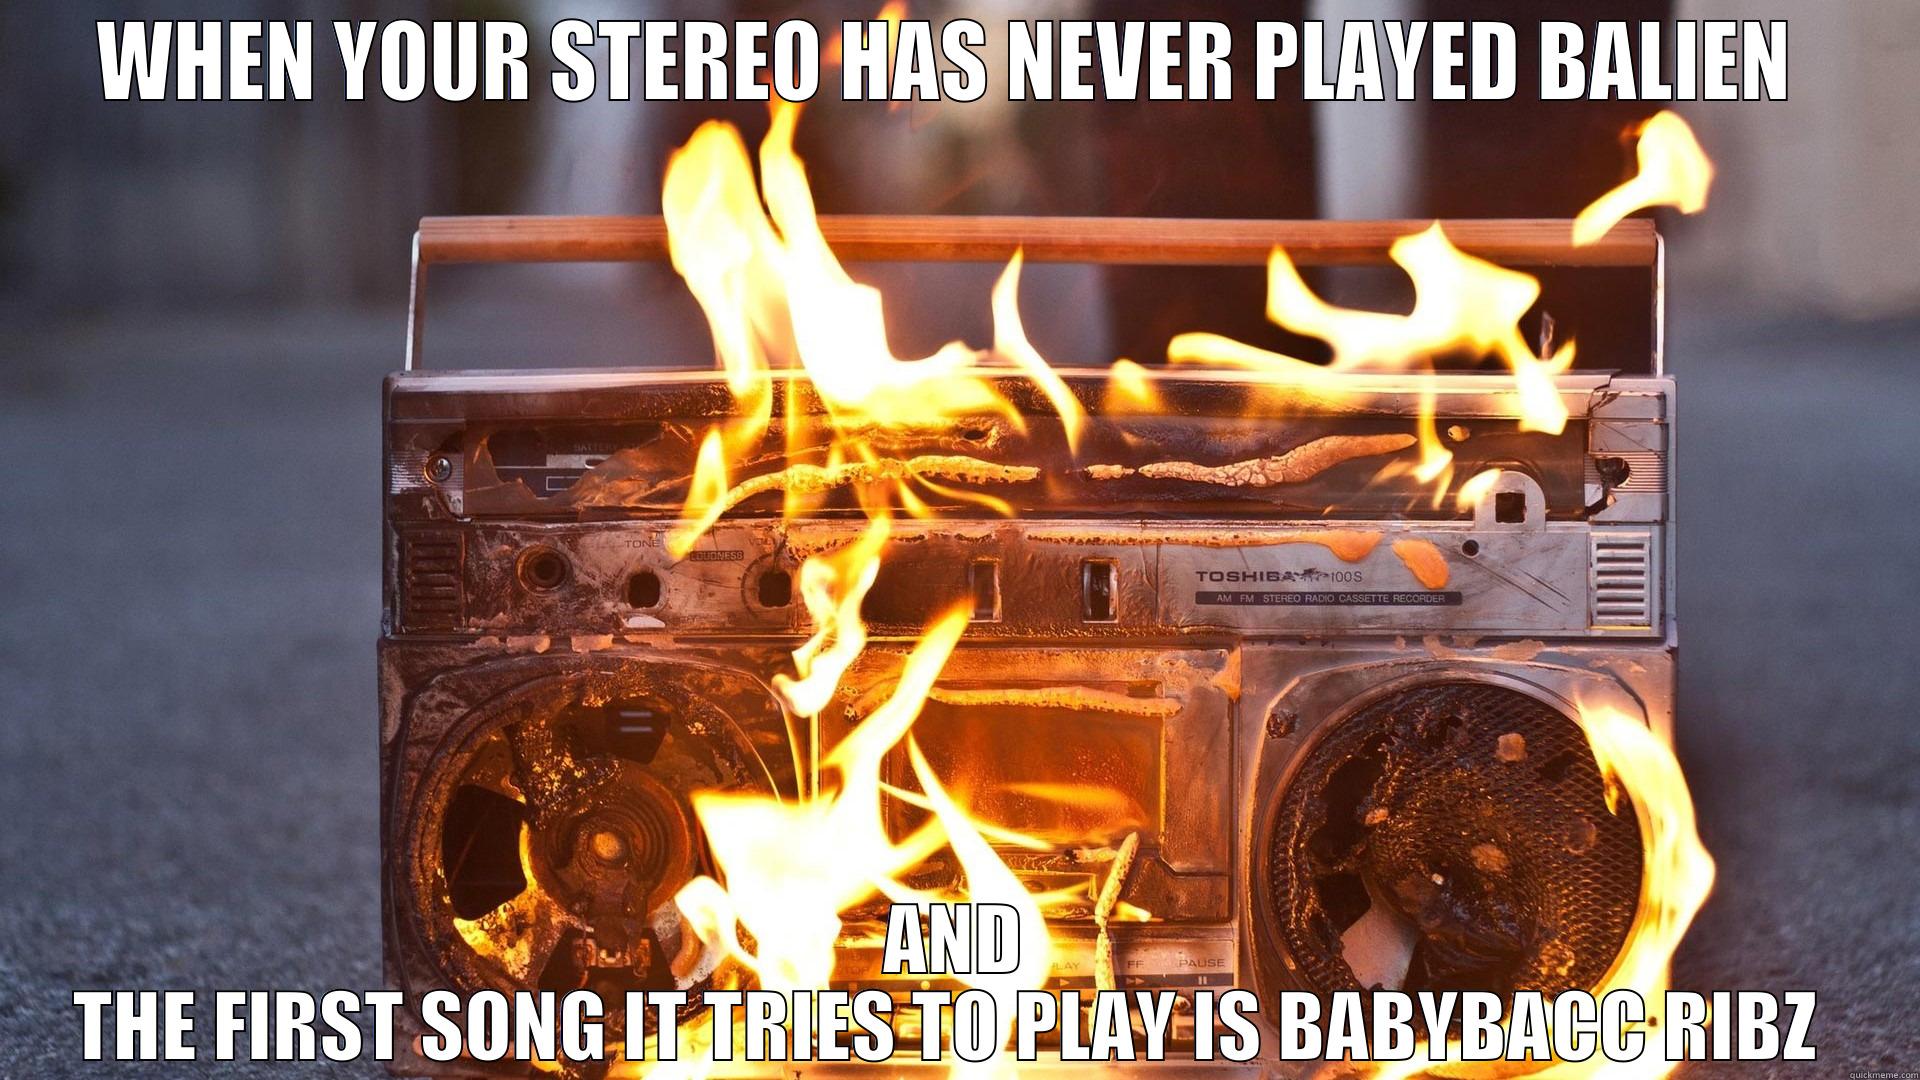 Bang Bang Bang Bang  - WHEN YOUR STEREO HAS NEVER PLAYED BALIEN  AND THE FIRST SONG IT TRIES TO PLAY IS BABYBACC RIBZ  Misc